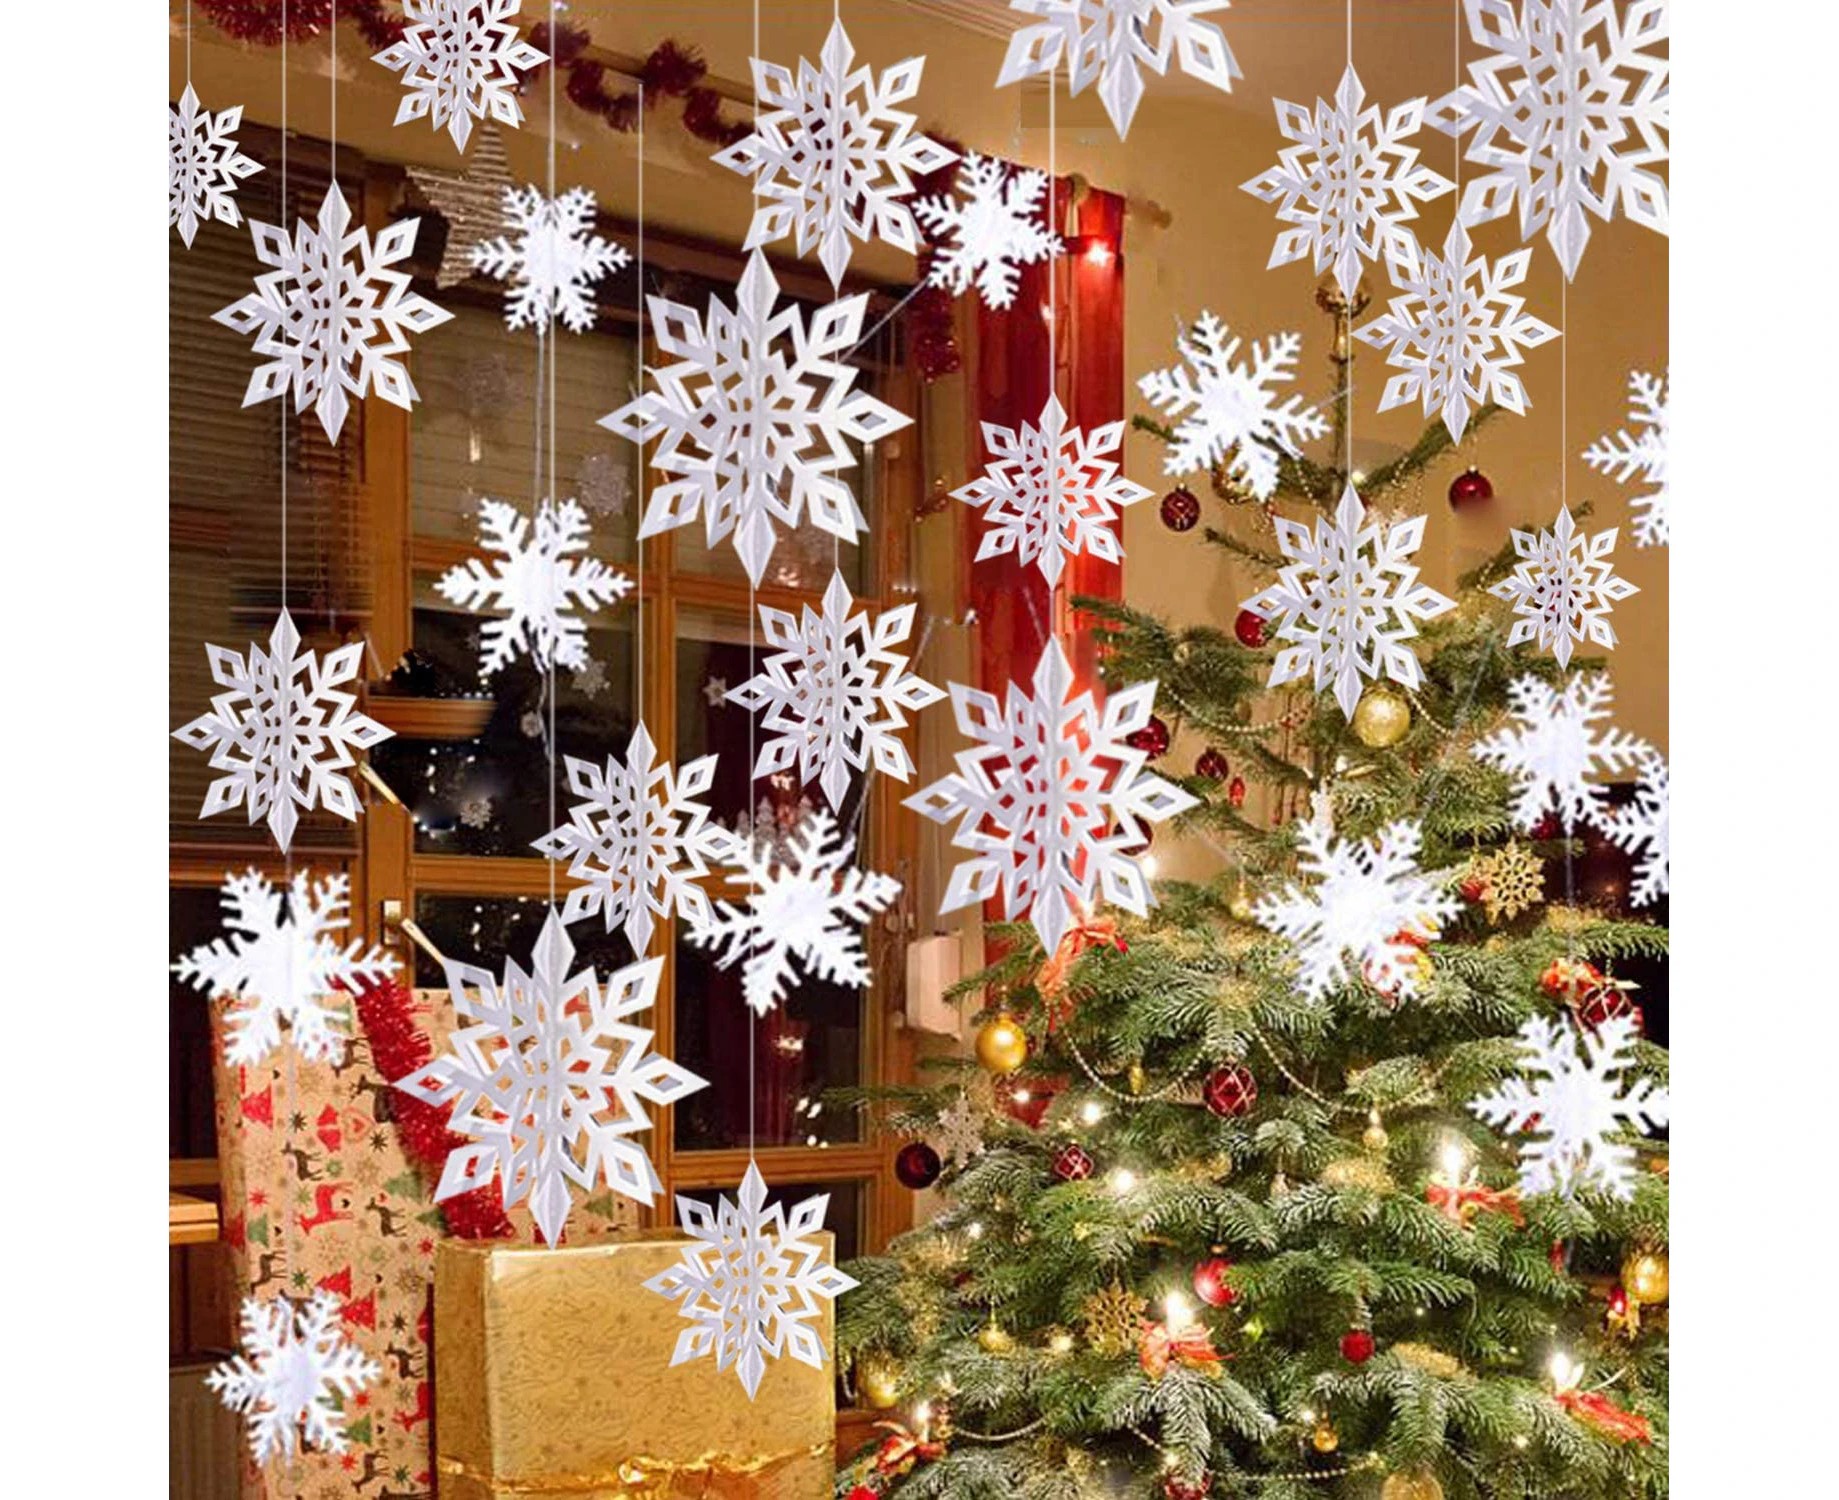 Large Hanging Snowflakes Decorations | VictoryStore – VictoryStore.com